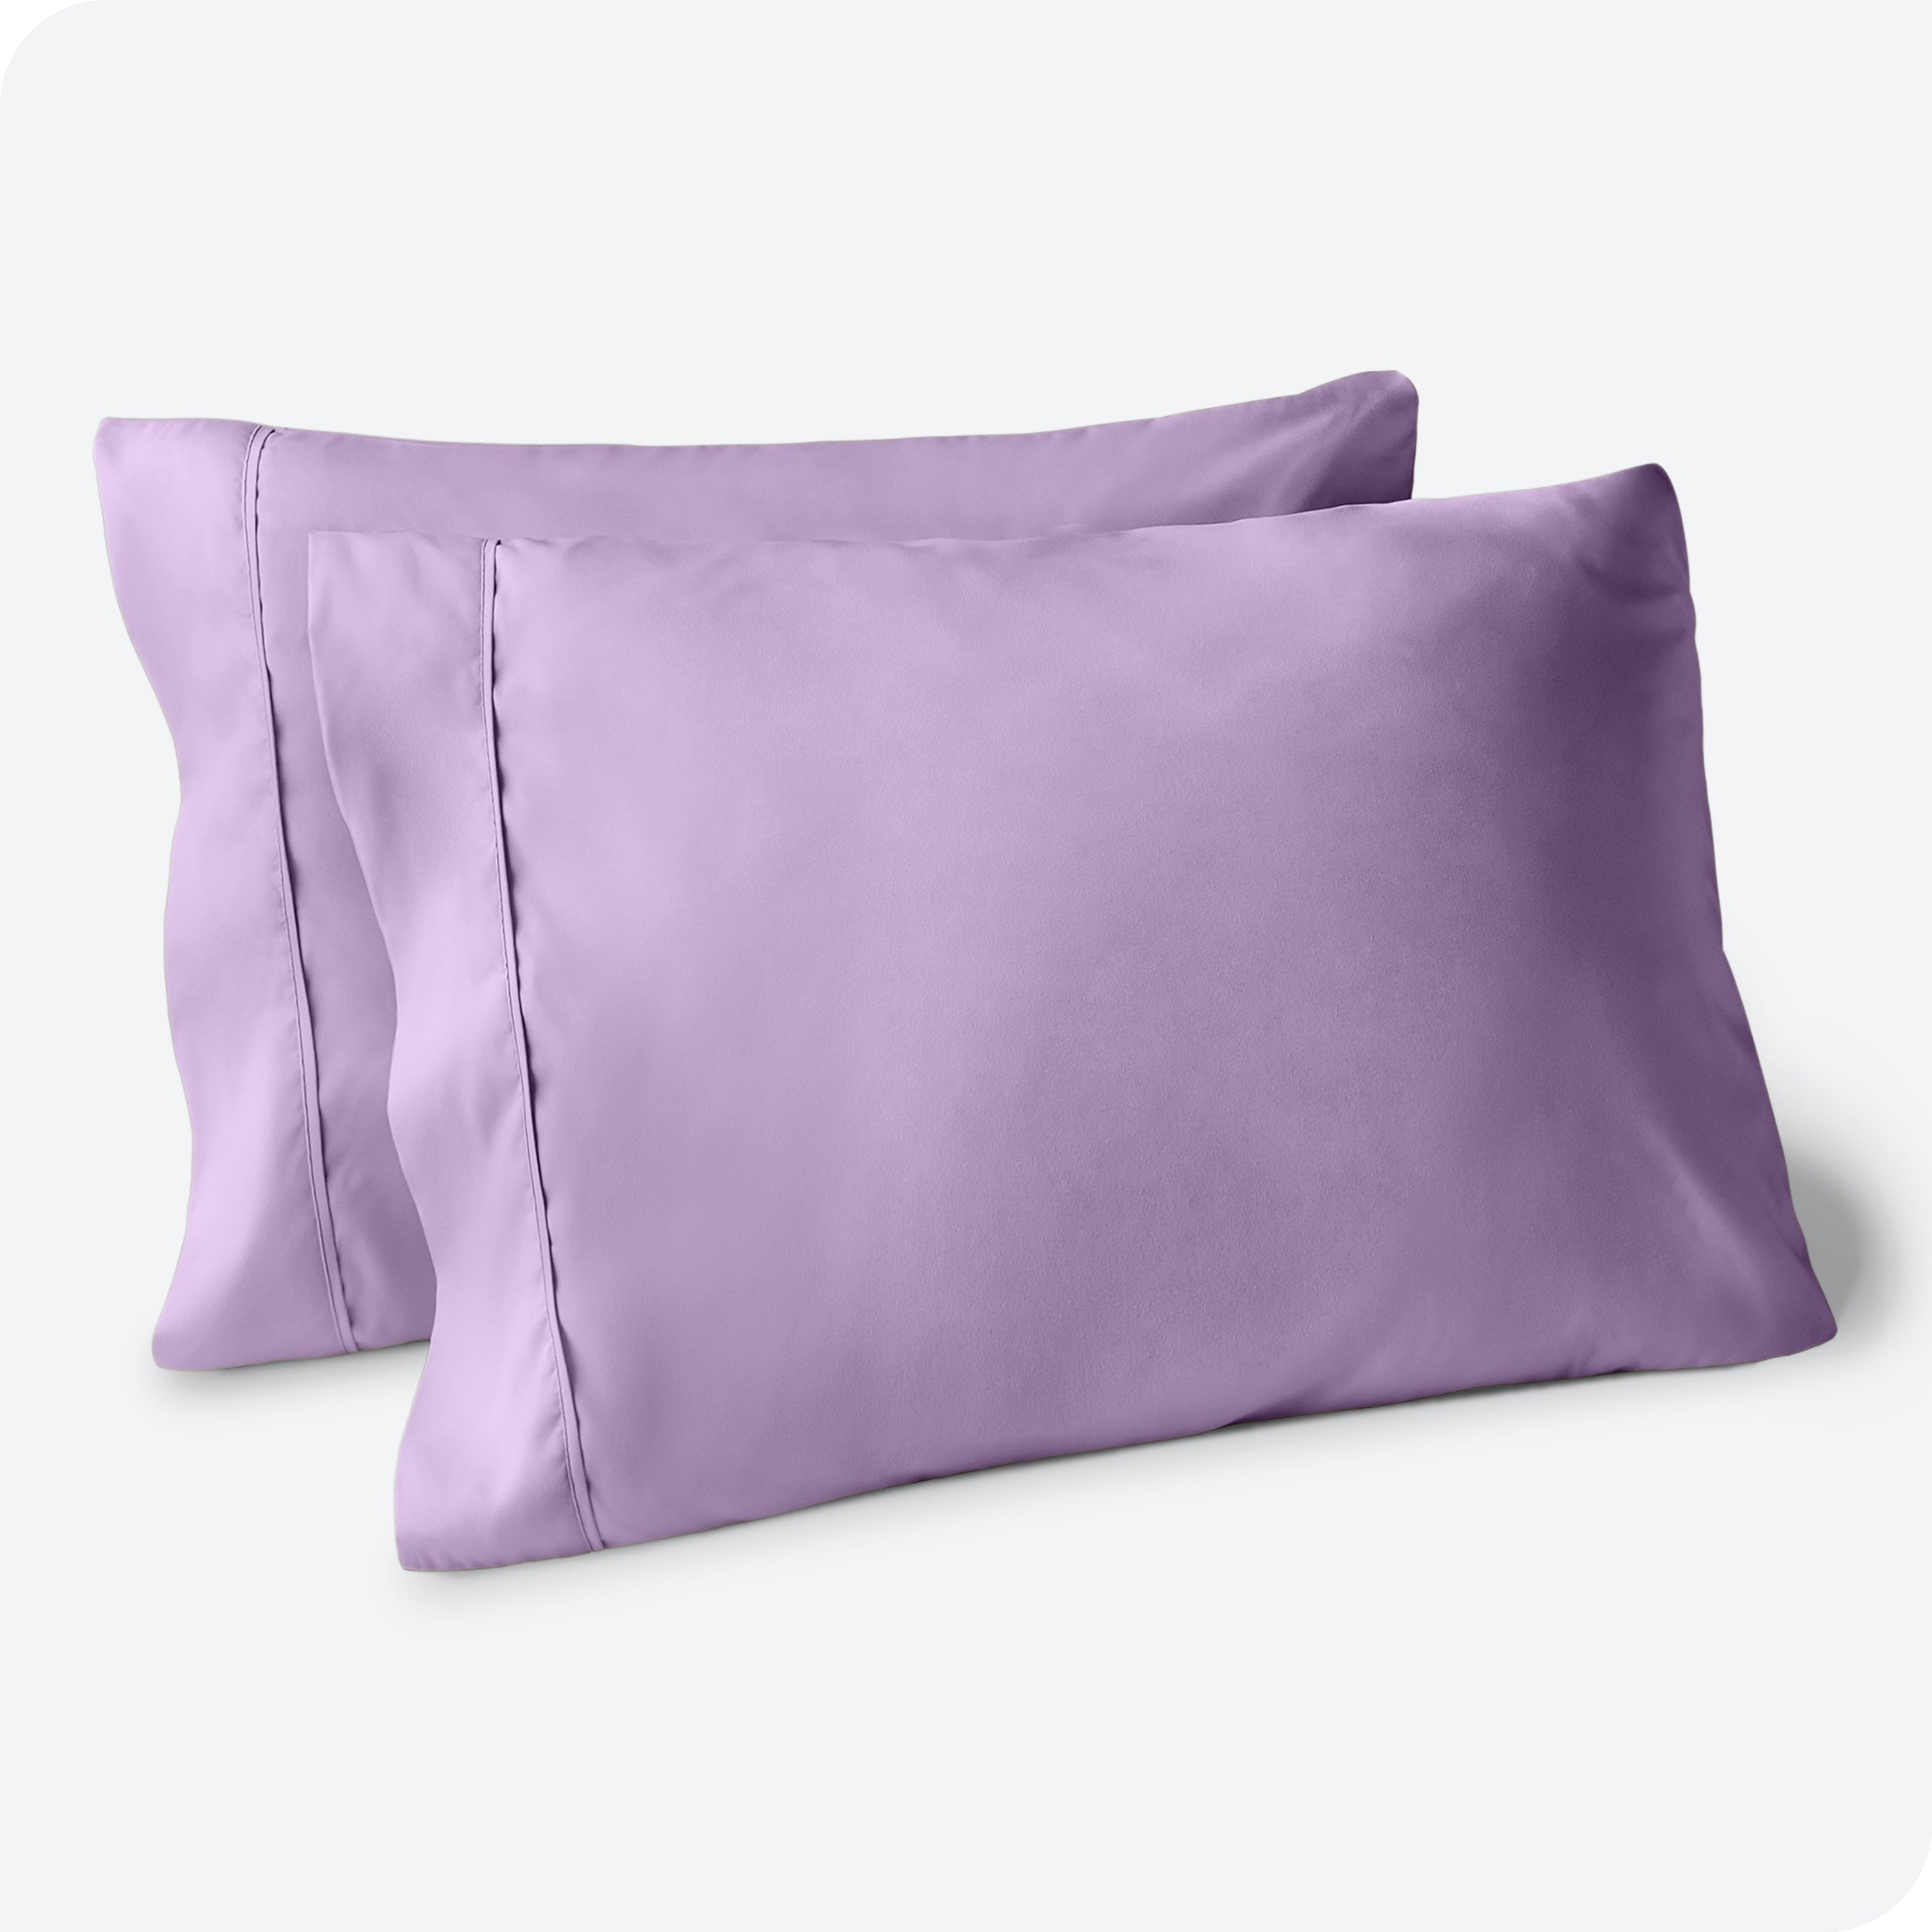 Two pillows on a white background with purple pillowcases on them